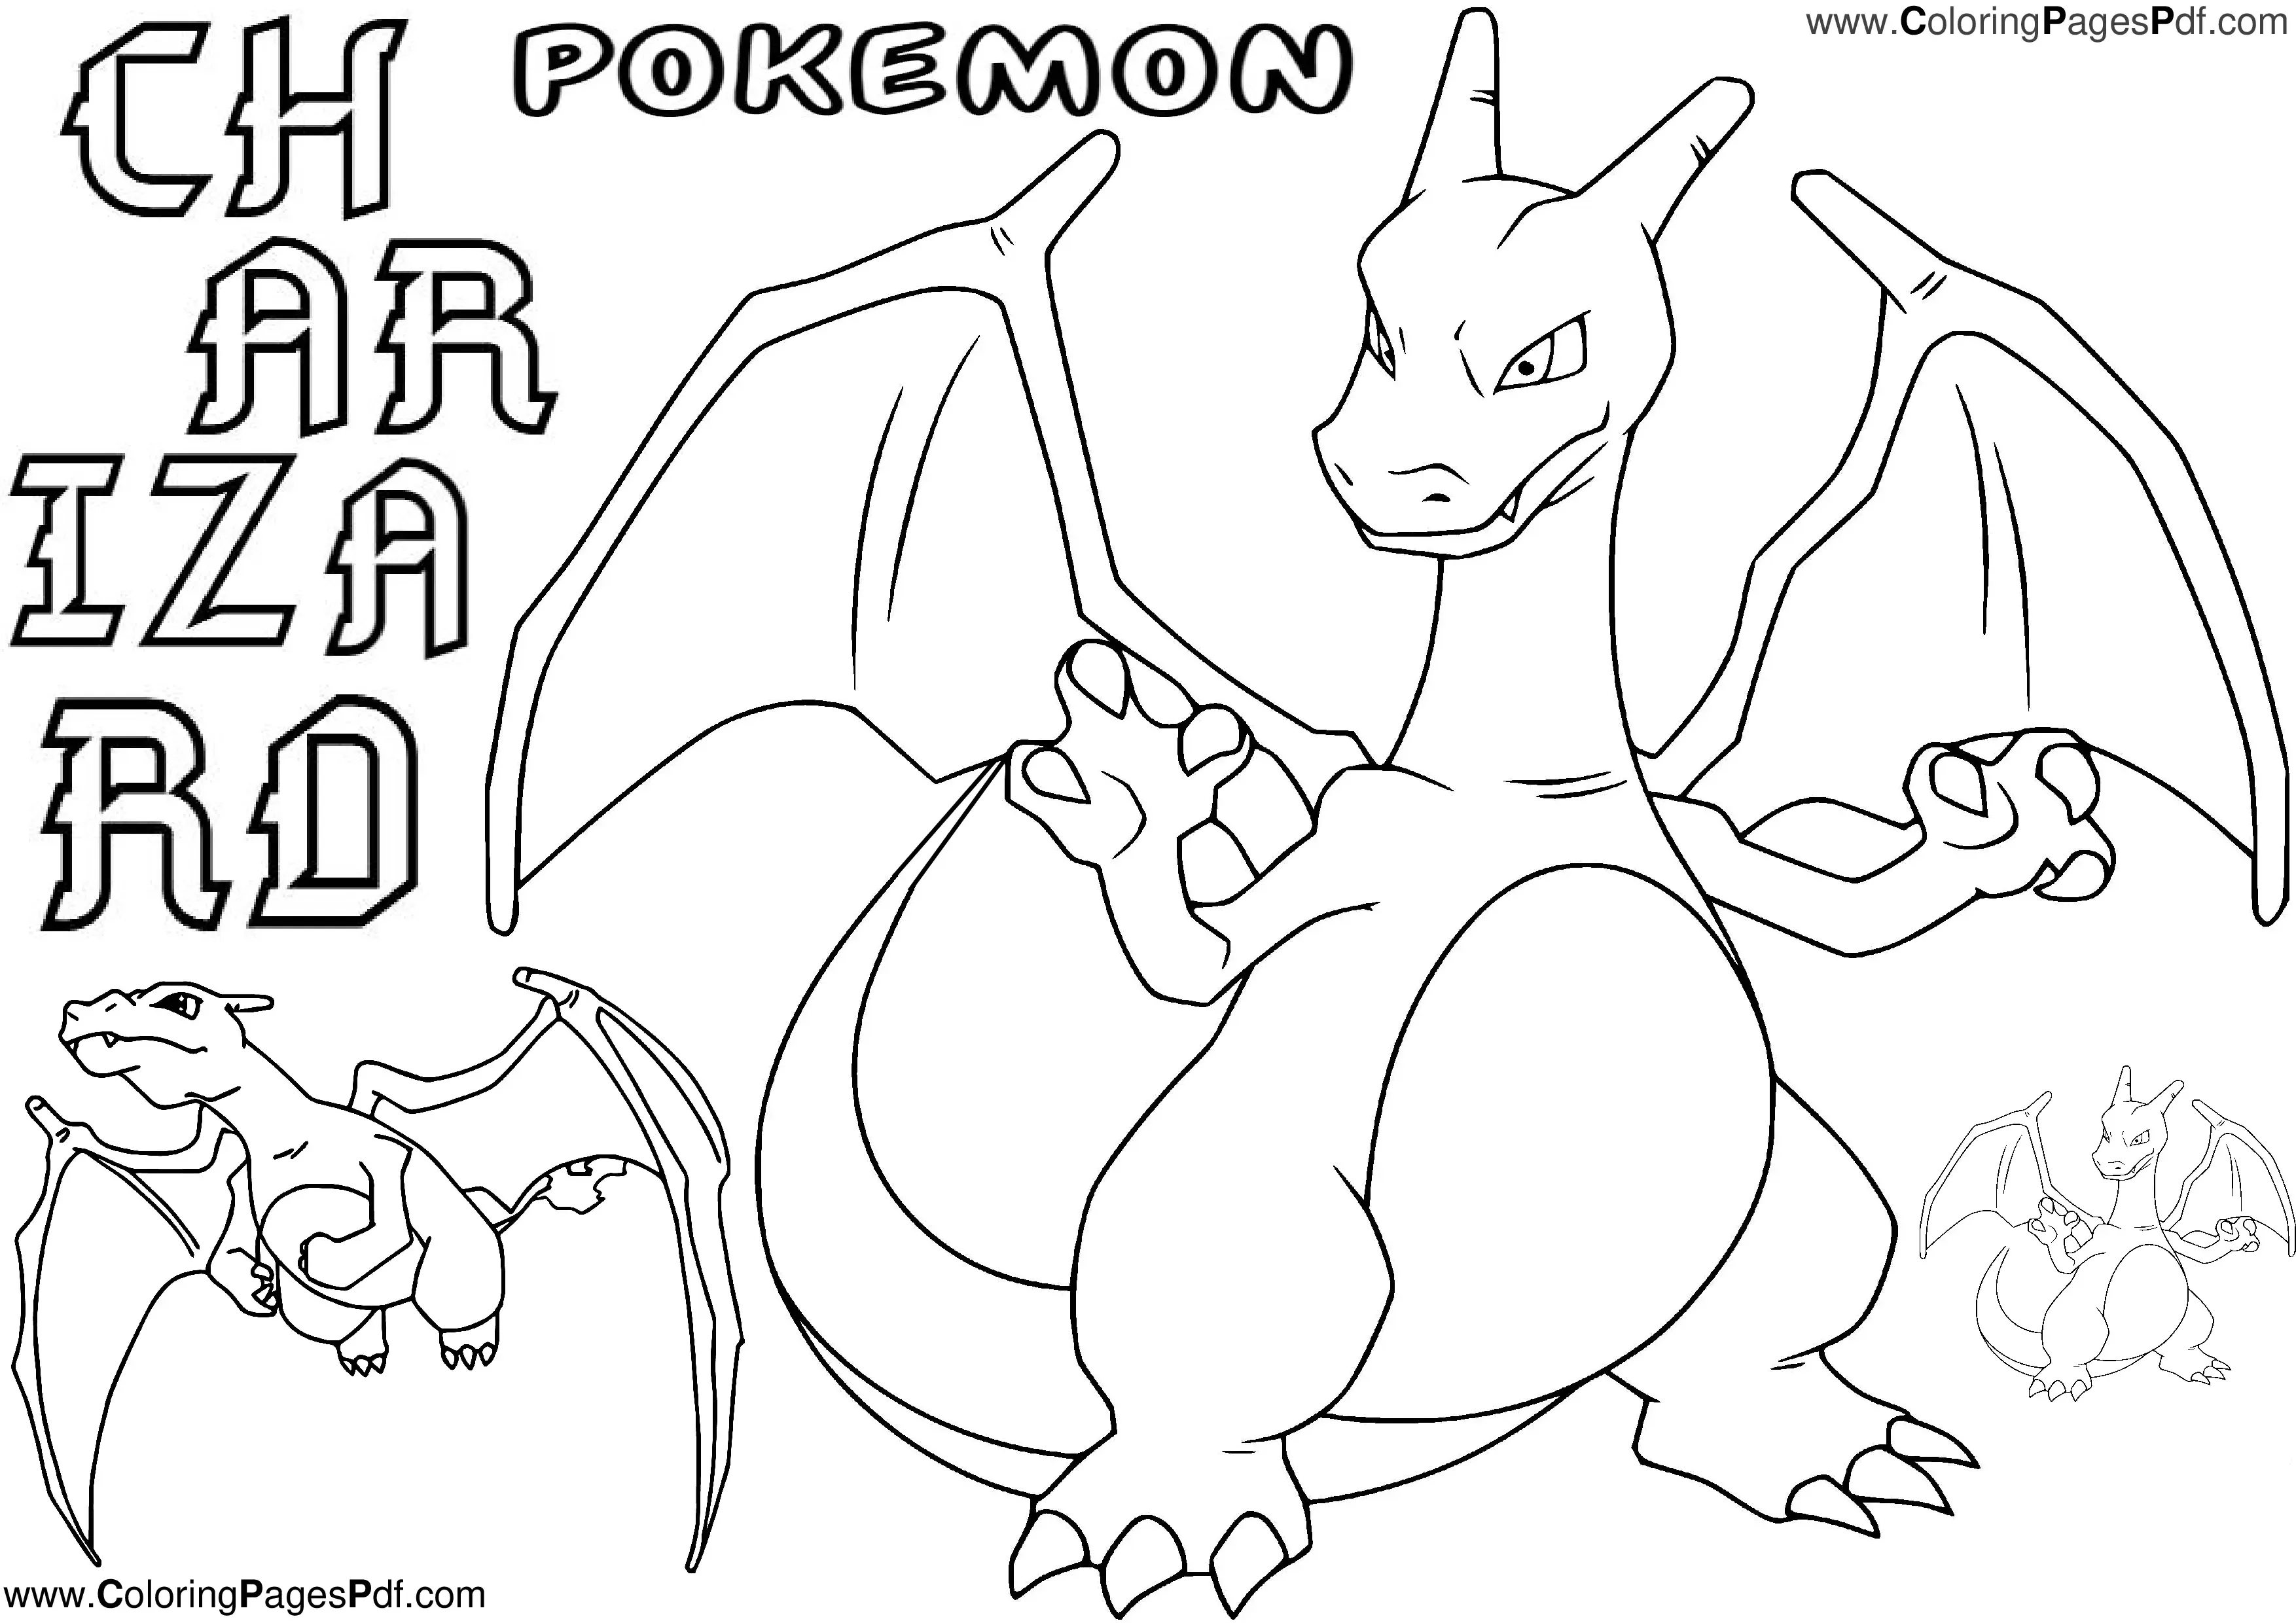 Pokemon Coloring pages Charizard